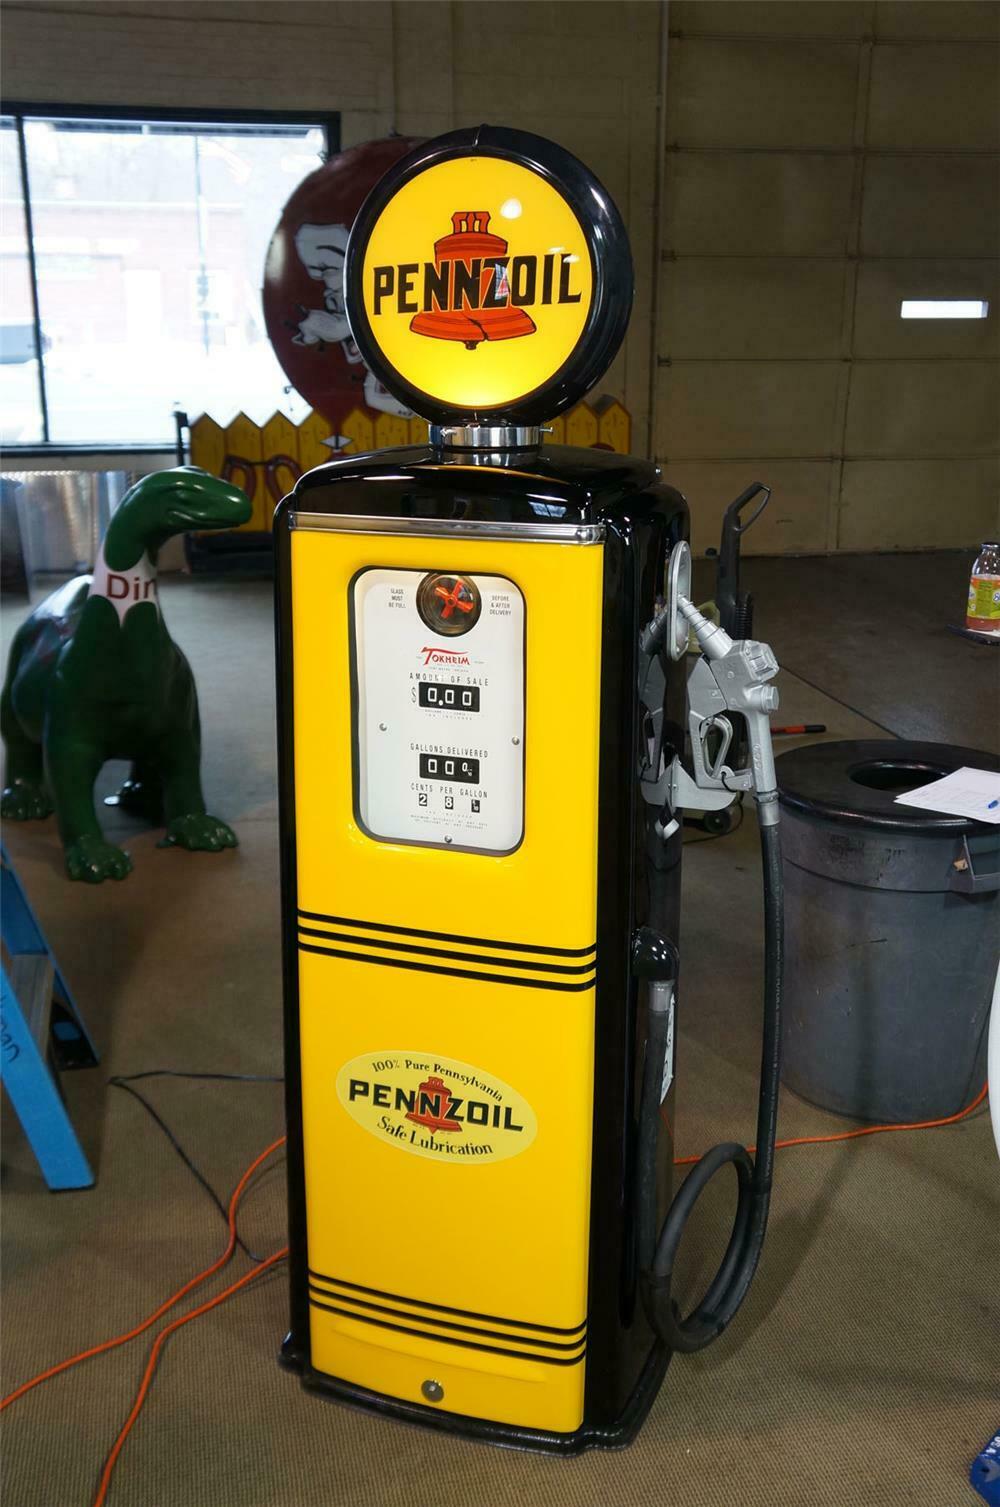 PENN-1 18" EARLY PENNZOIL OIL LUBSTER front DECAL GAS PUMP SIGN GASOLINE 